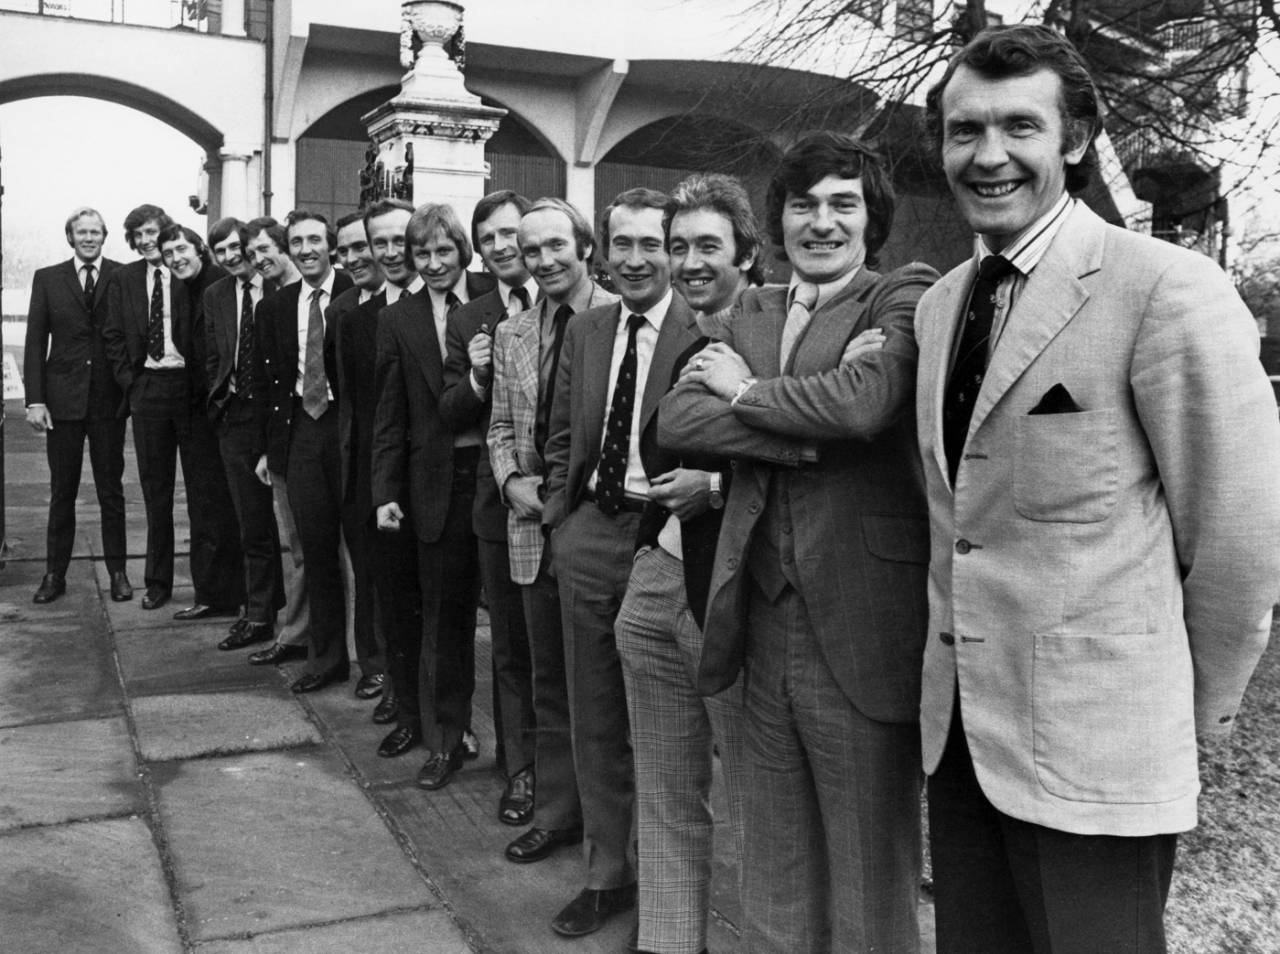 England cricketers of the '70s: not exactly sporty looking, the author finds&nbsp;&nbsp;&bull;&nbsp;&nbsp;Getty Images